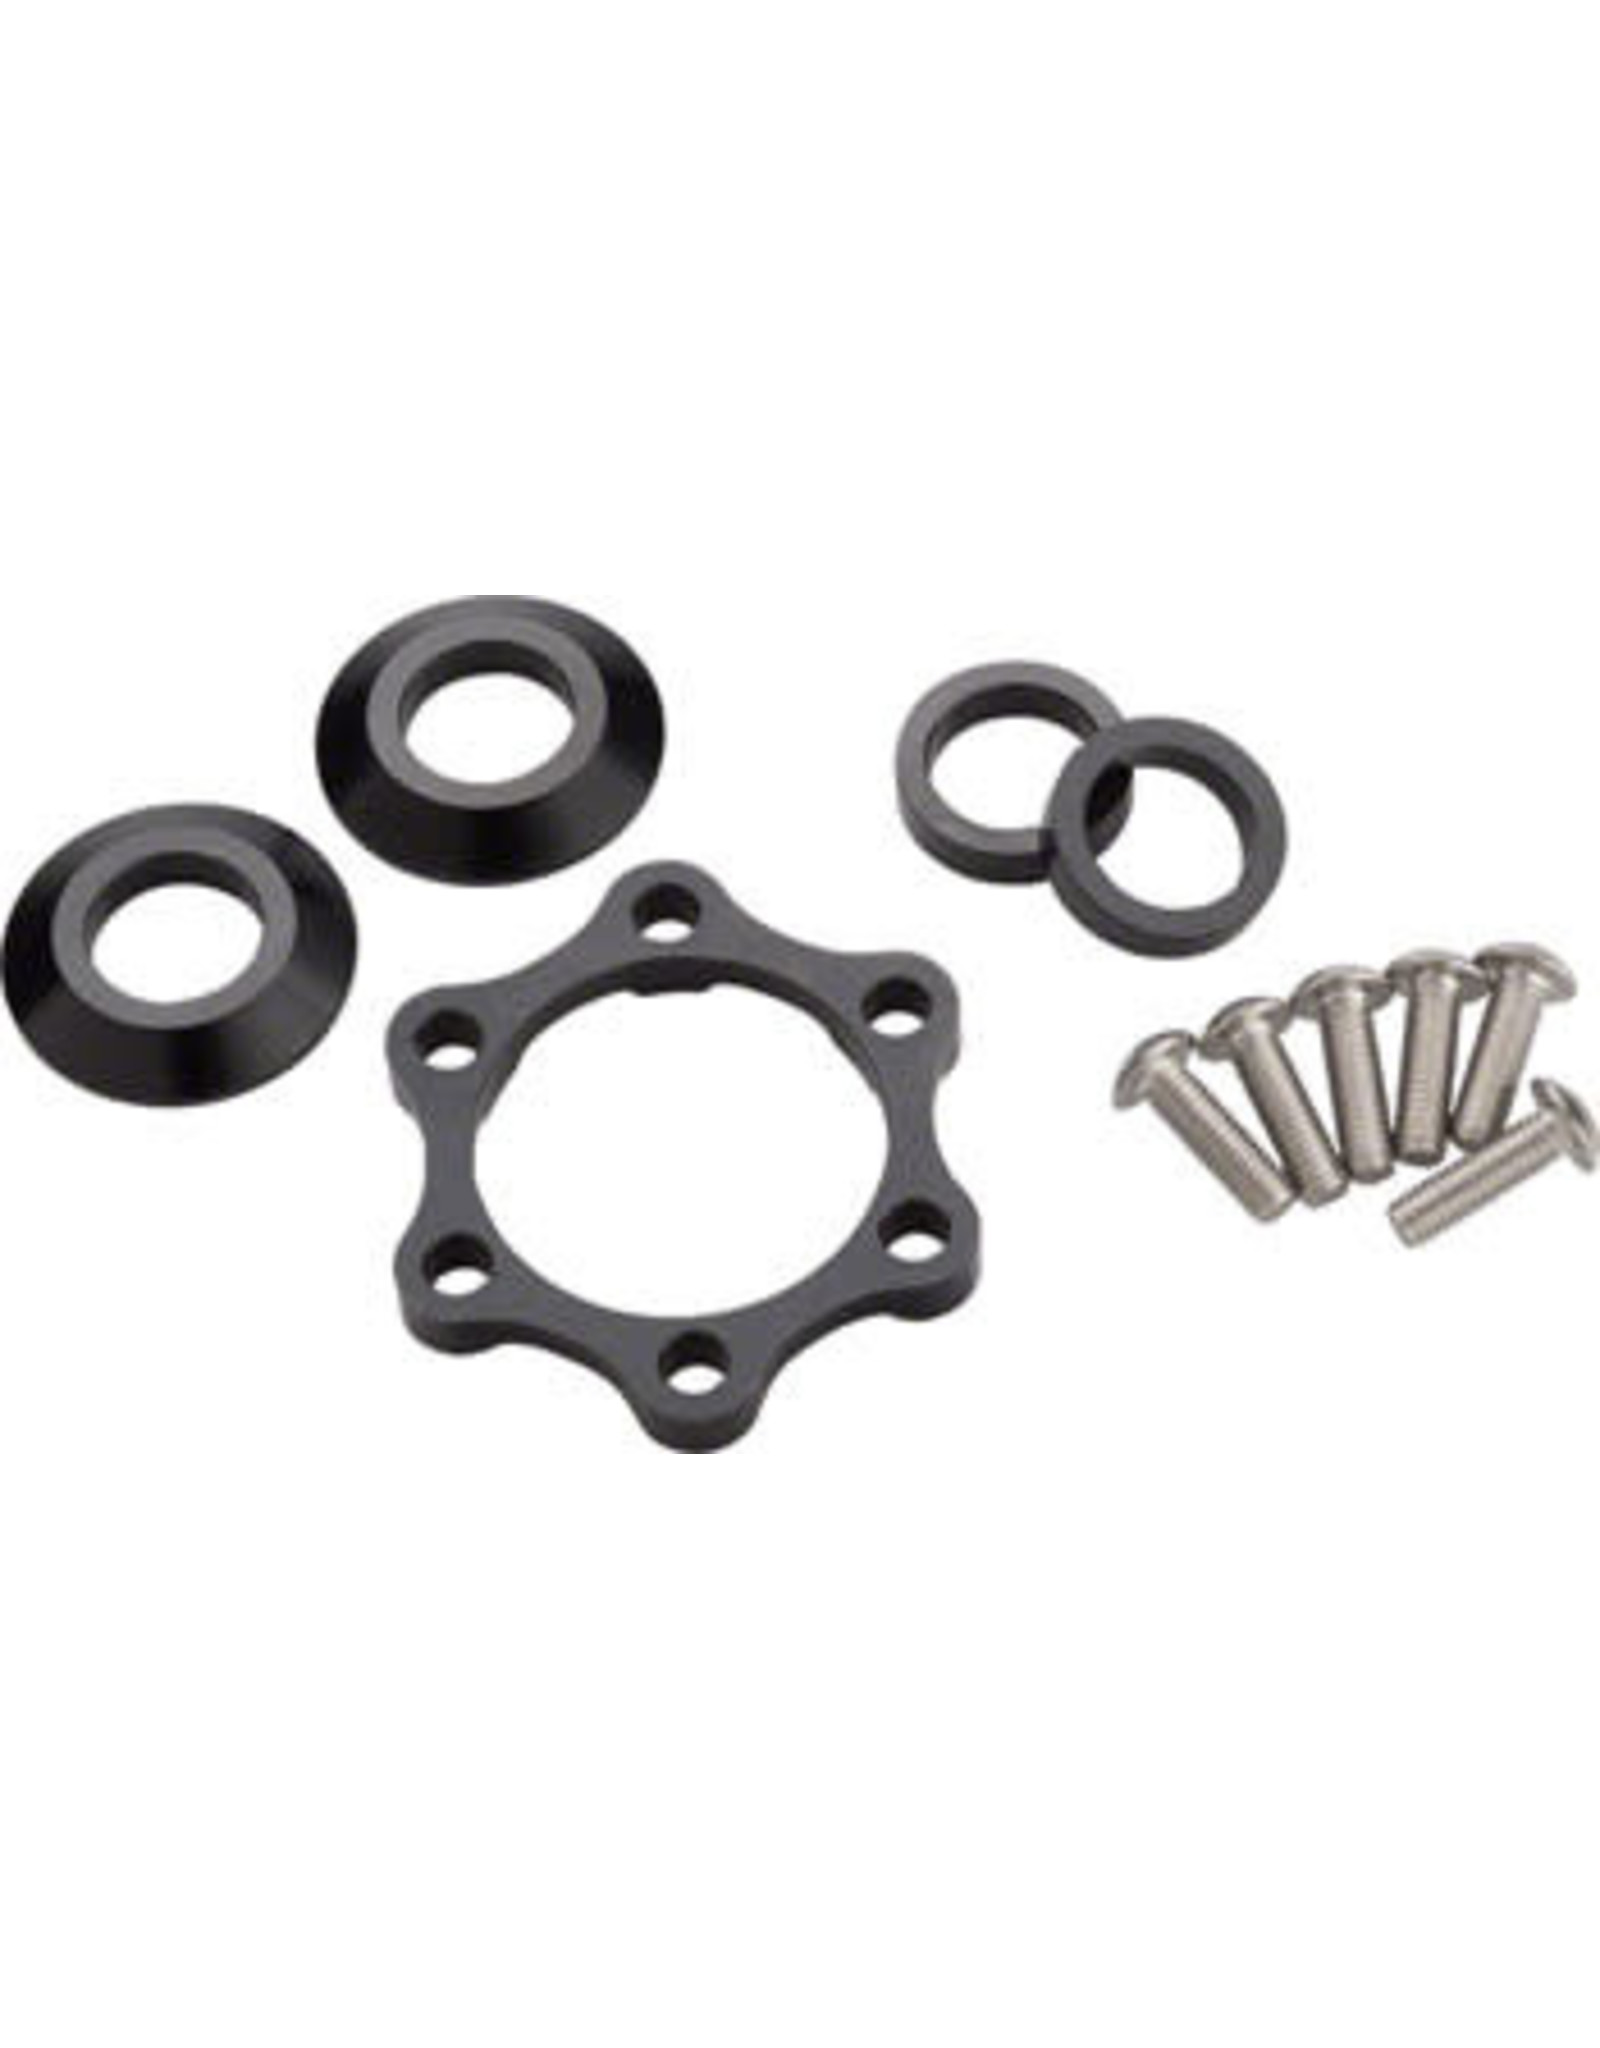 Problem Solvers Problem Solvers Booster Front Wheel Adaptor Kit 10mm